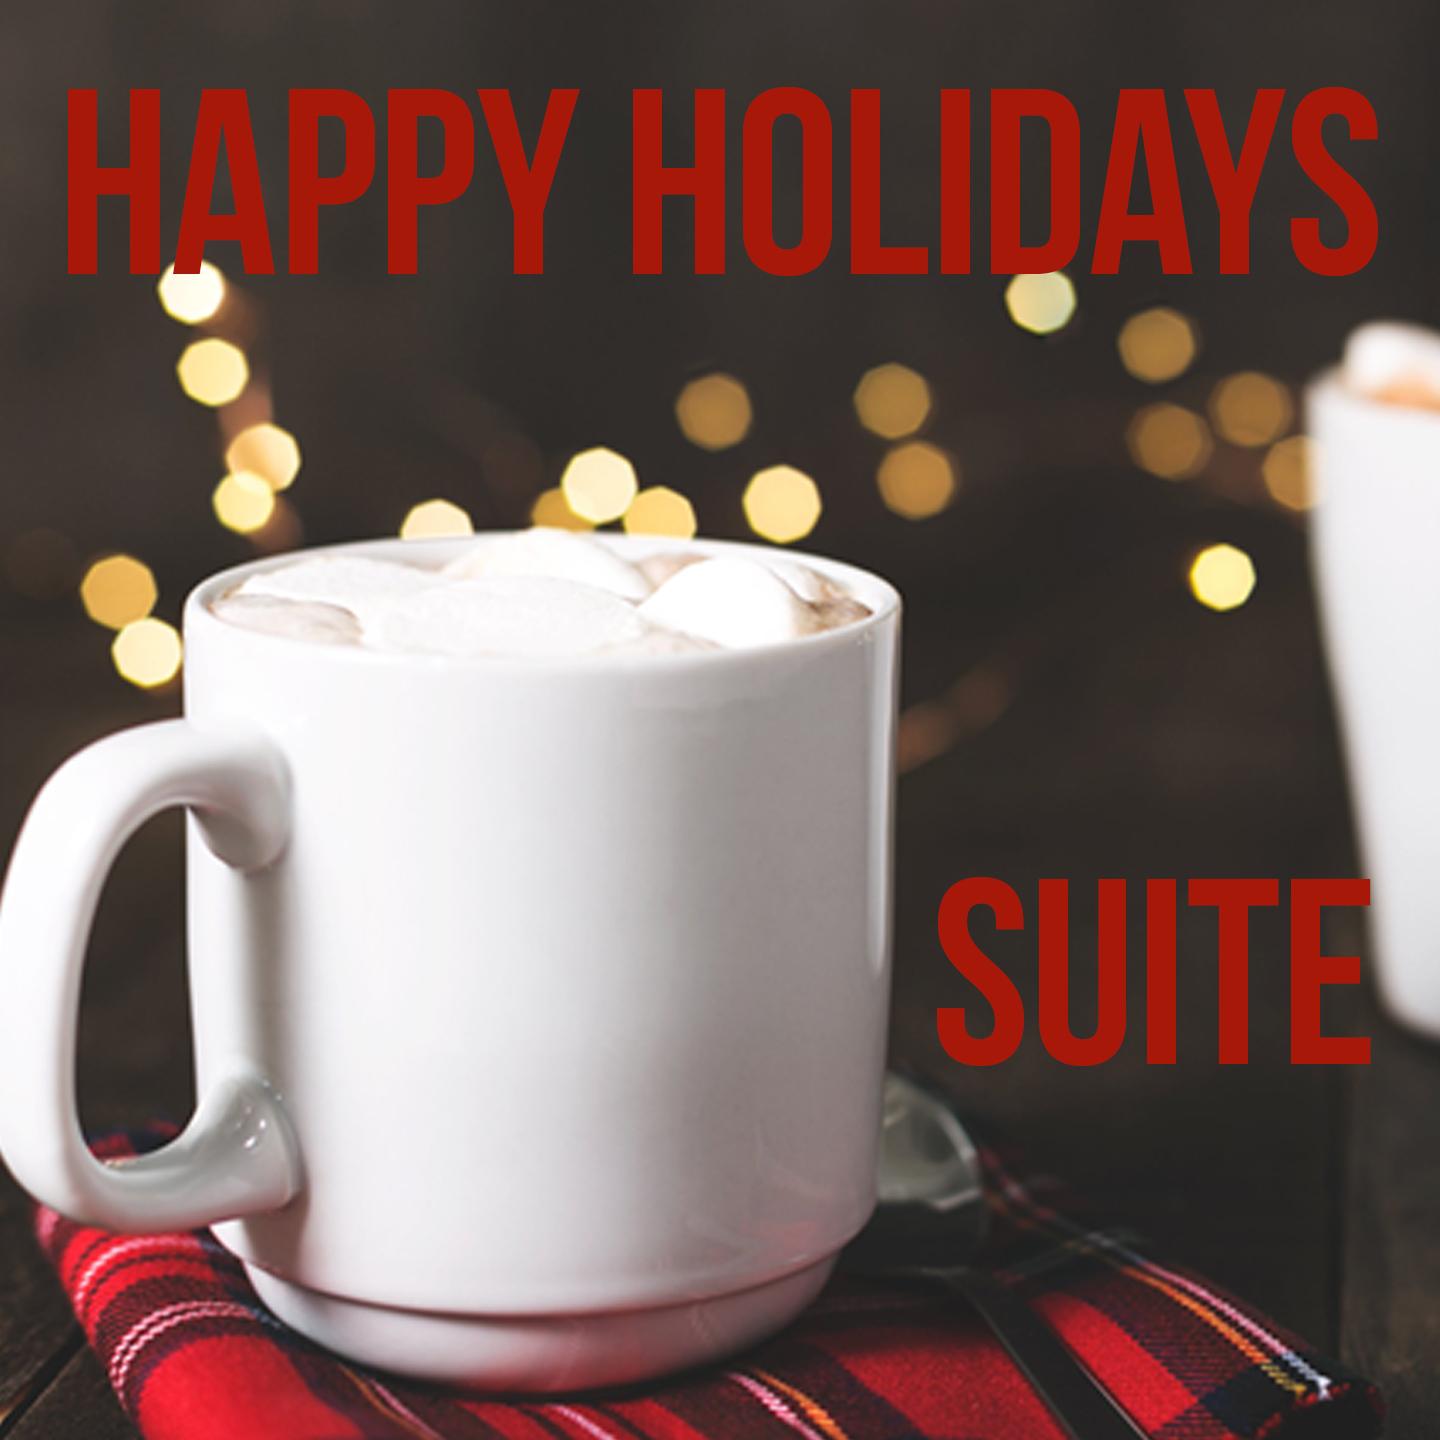 Happy Holiday Suite